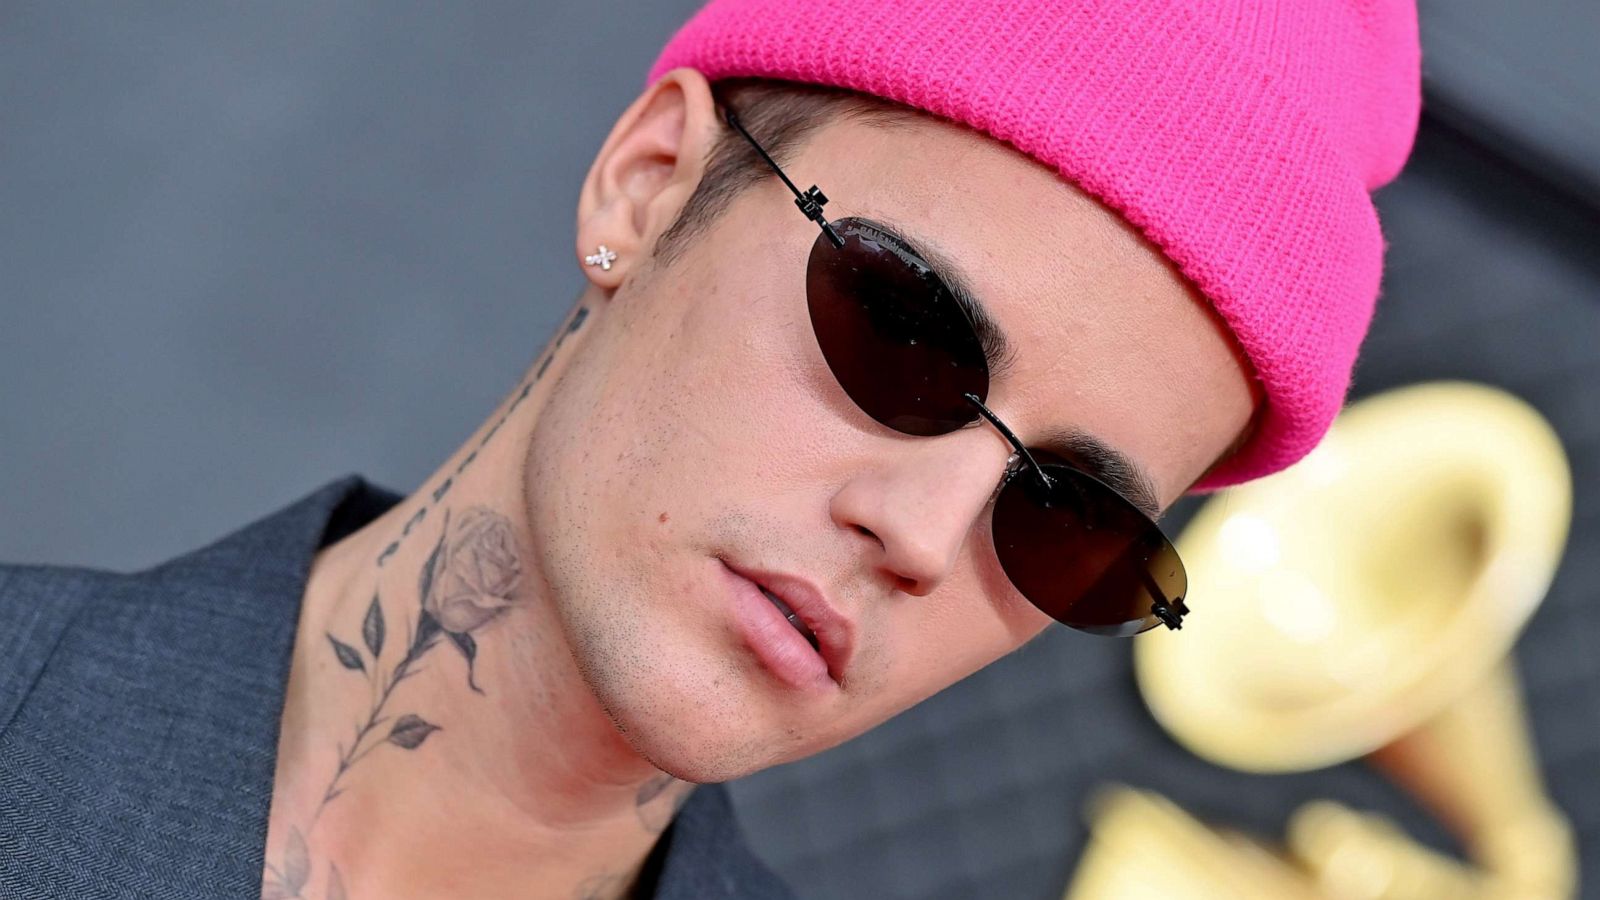 Justin Bieber shows off his tattoos as he goes shirtless mum on Selena  Gomezs abuse accusations  Daily Mail Online